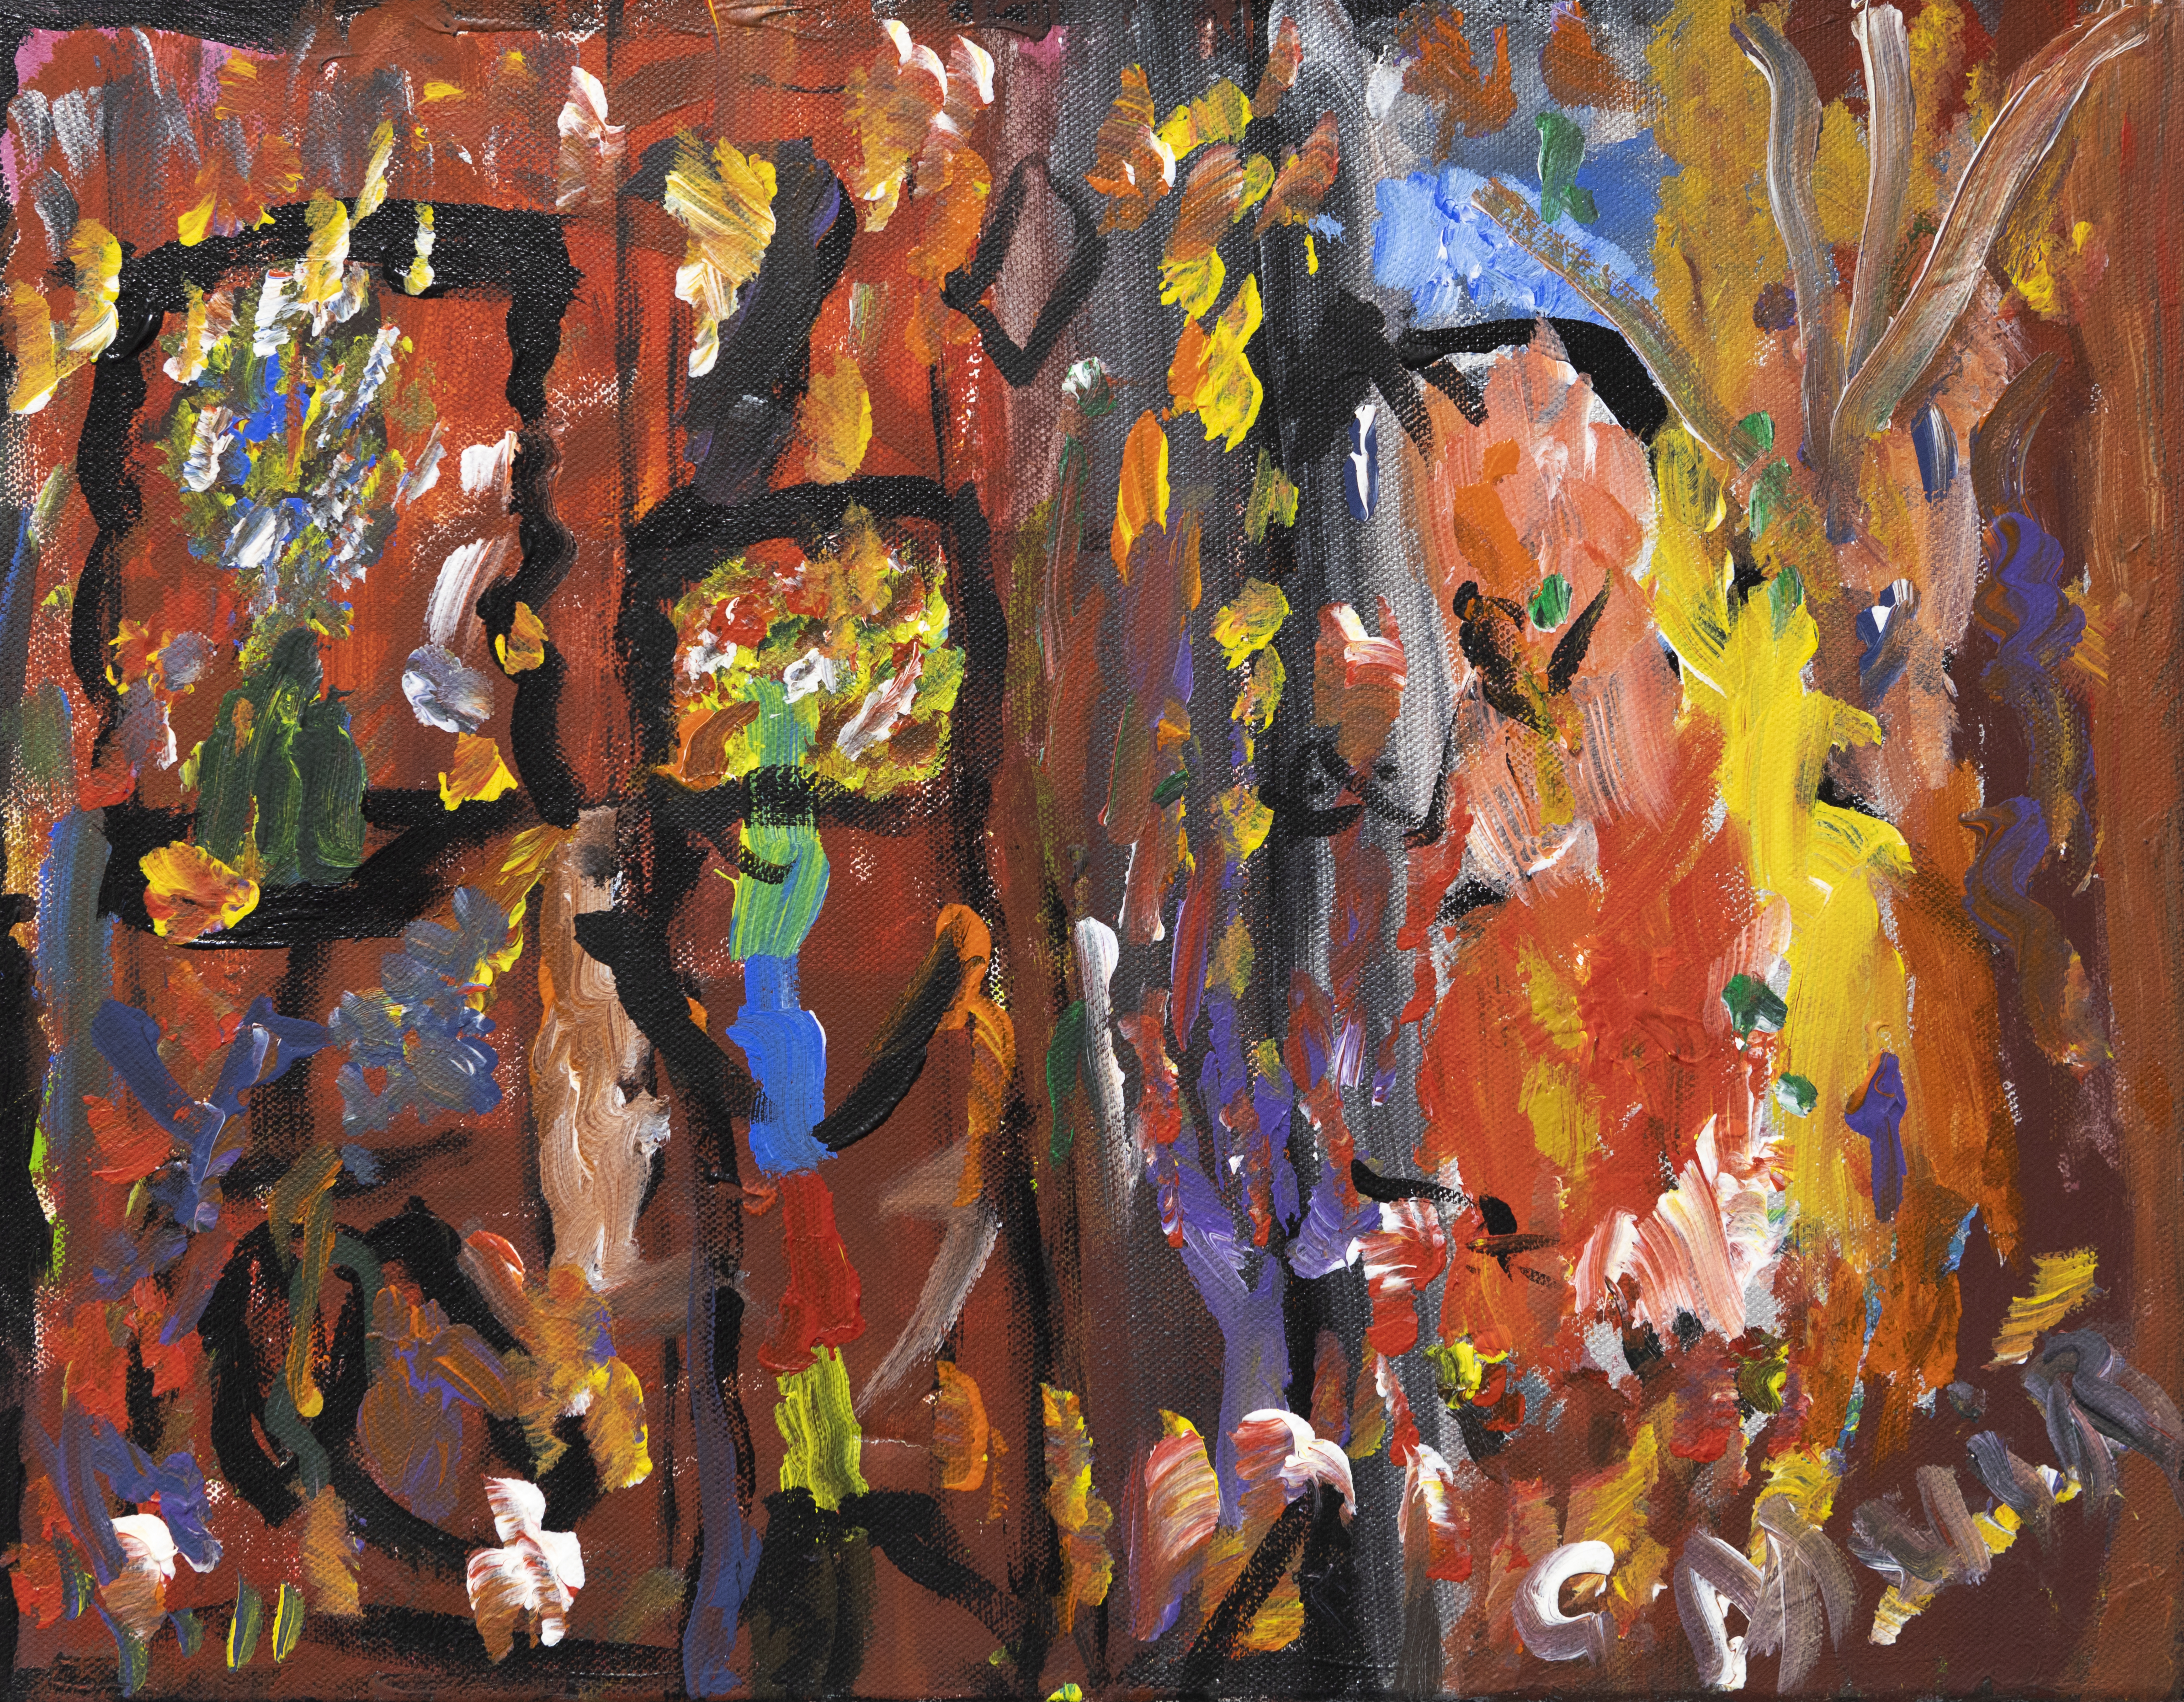 Abstract background with figures hovering in front.